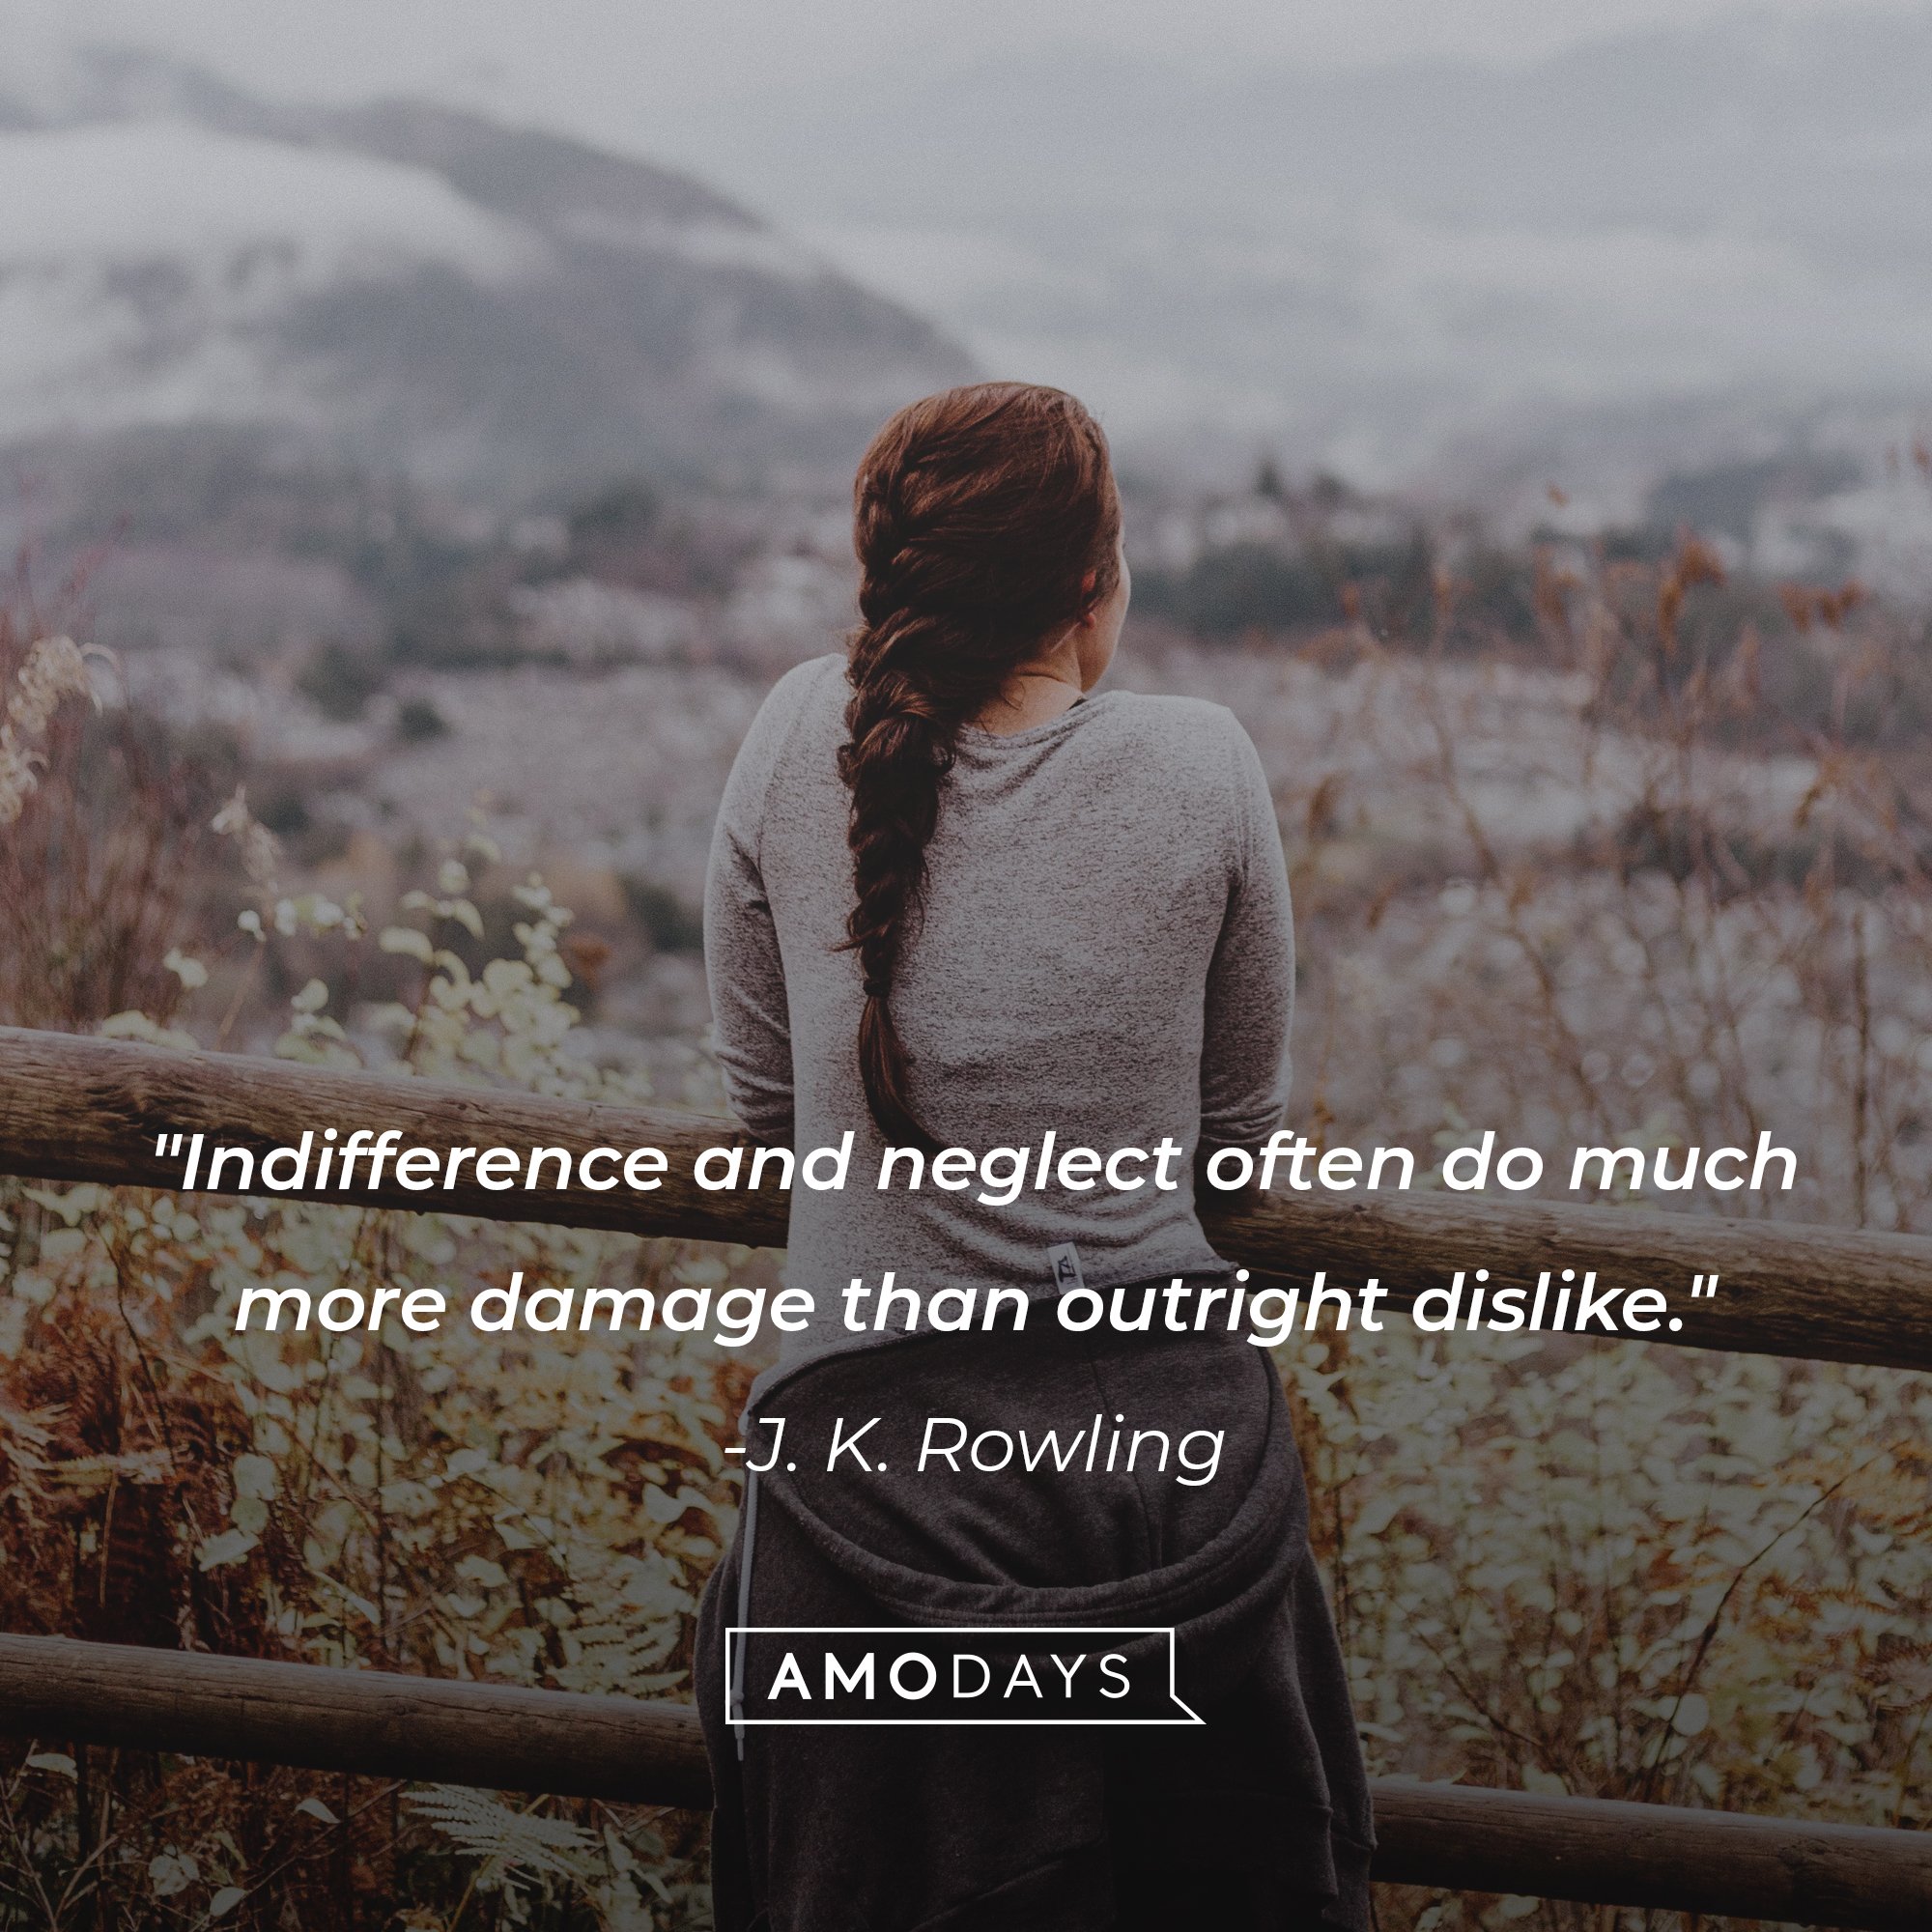 J.K. Rowling's quote: "Indifference and neglect often do much more damage than outright dislike." | Image: AmoDays